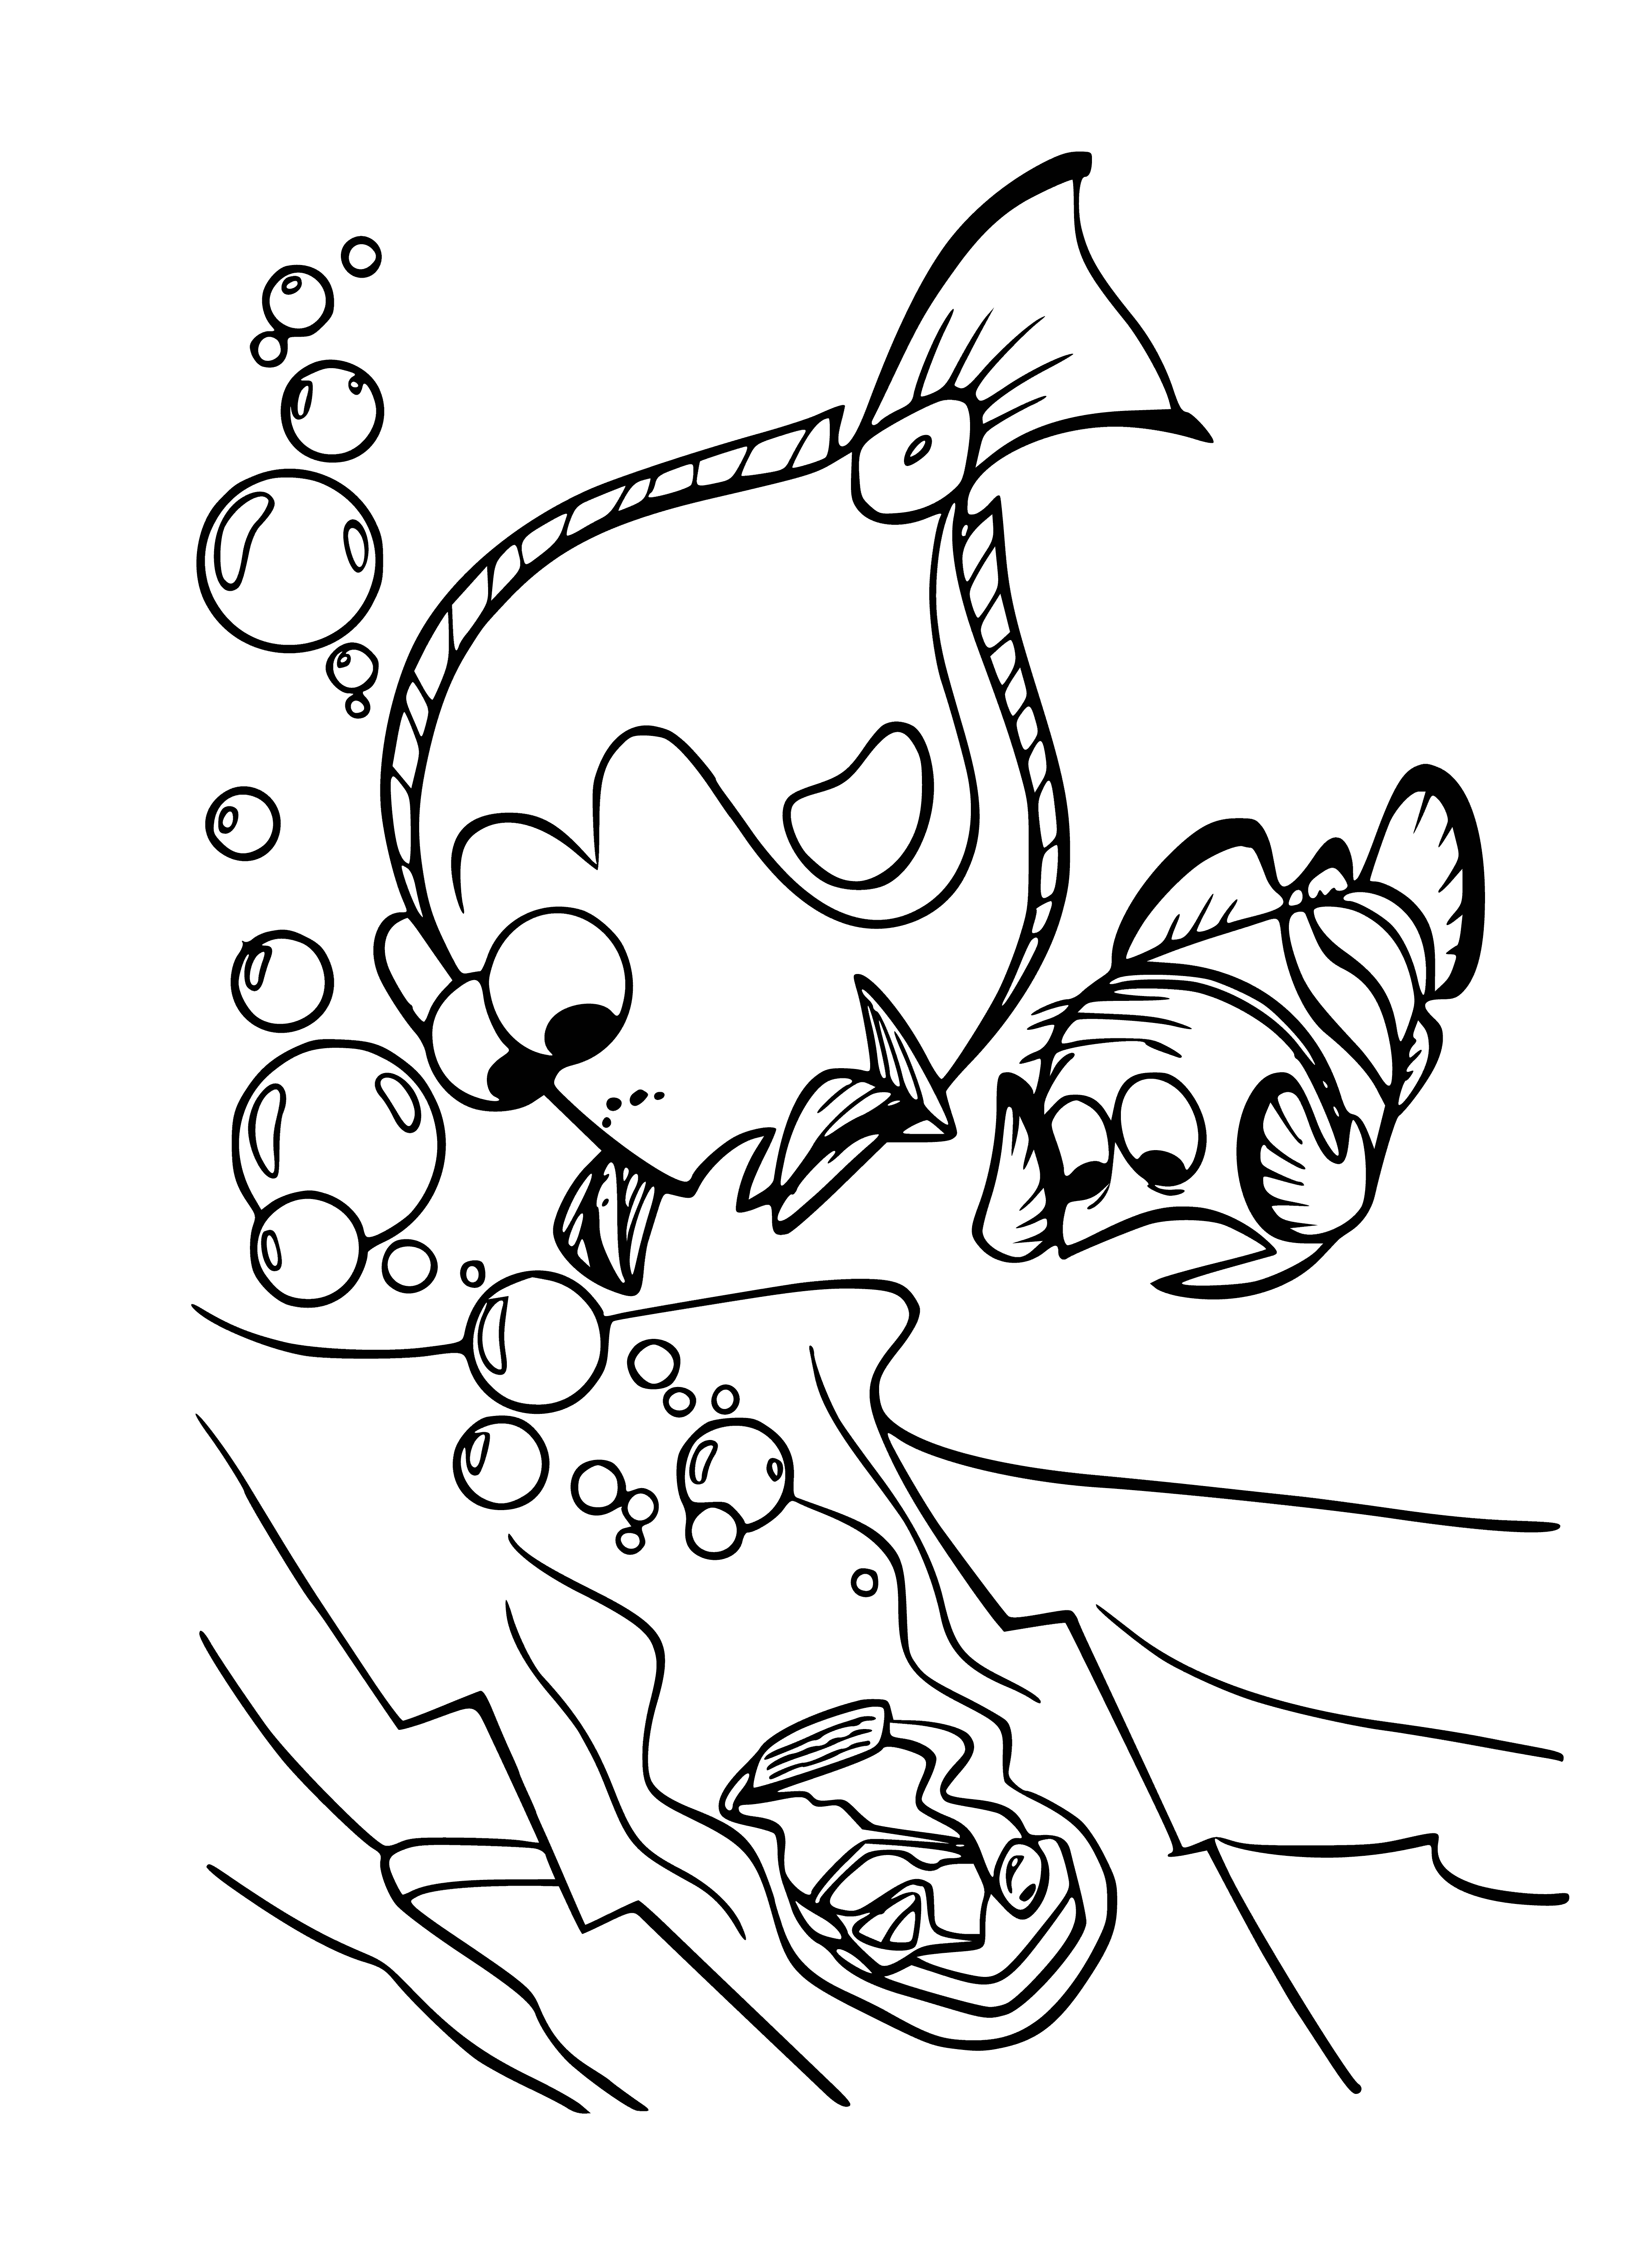 The mask falls coloring page